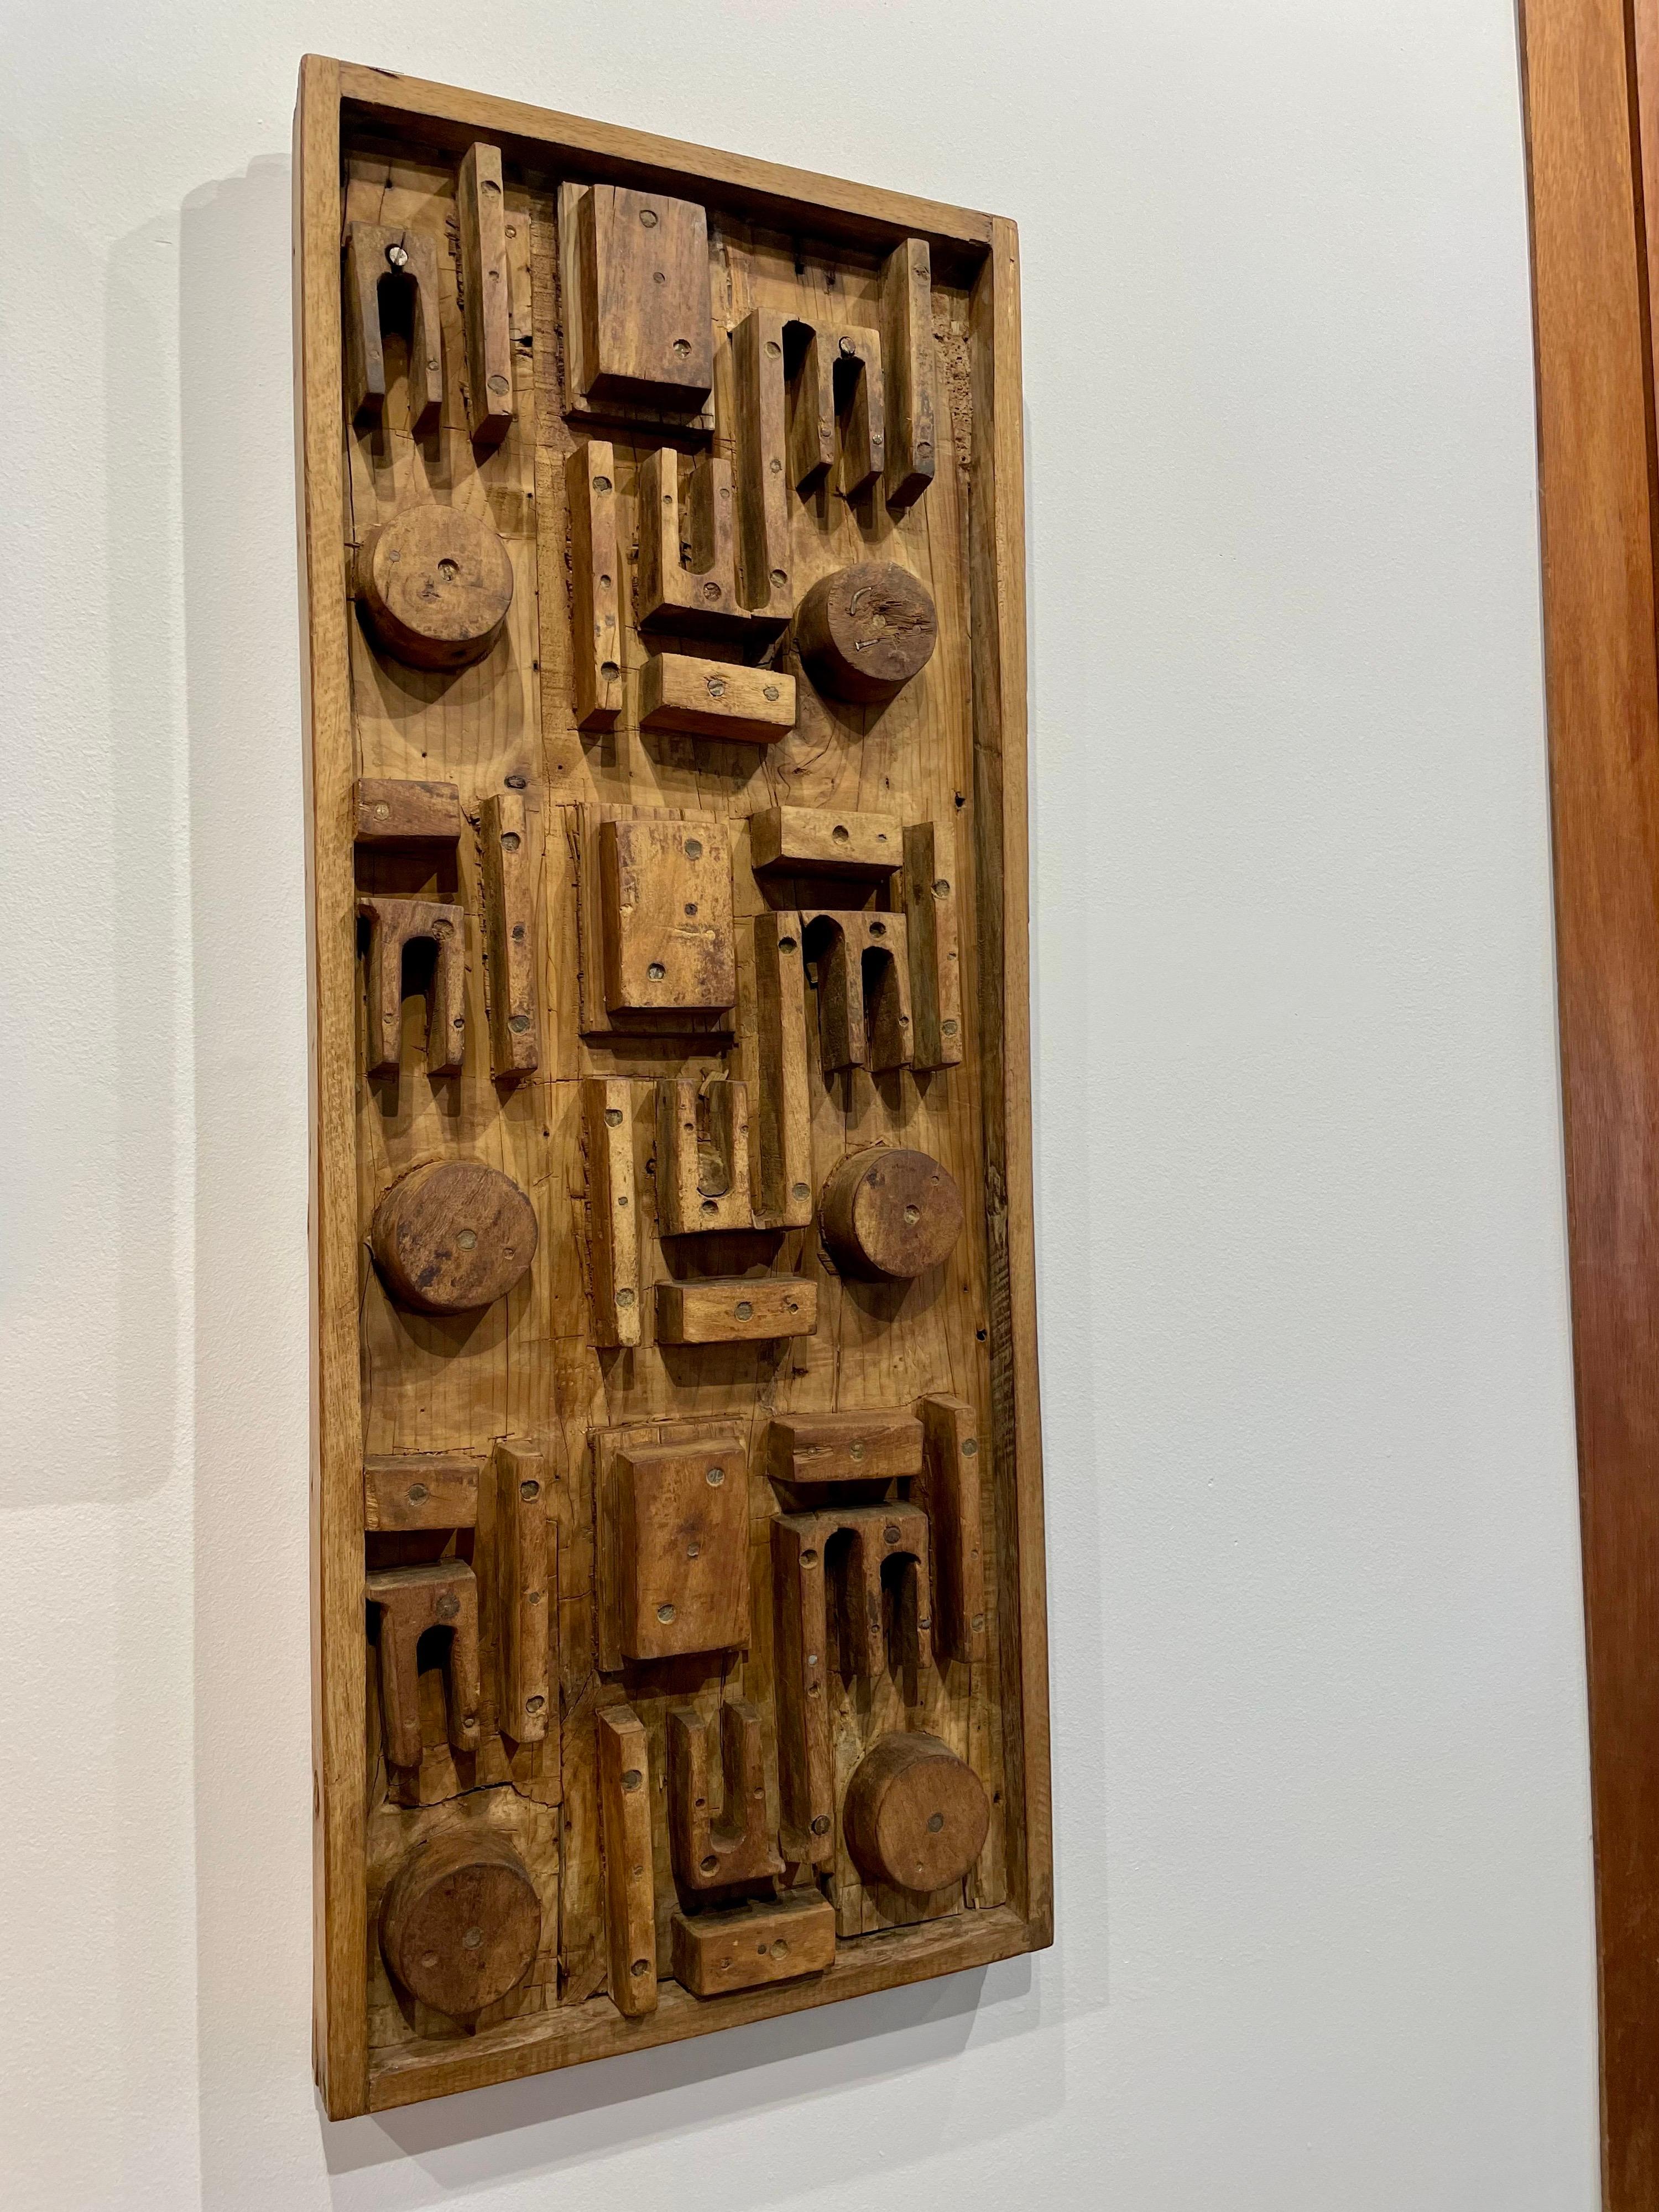 This is a wonderful industrial and geometric style factory mold in wood very much reminiscent of Nevelson. Can be hung vertically or horizontally.